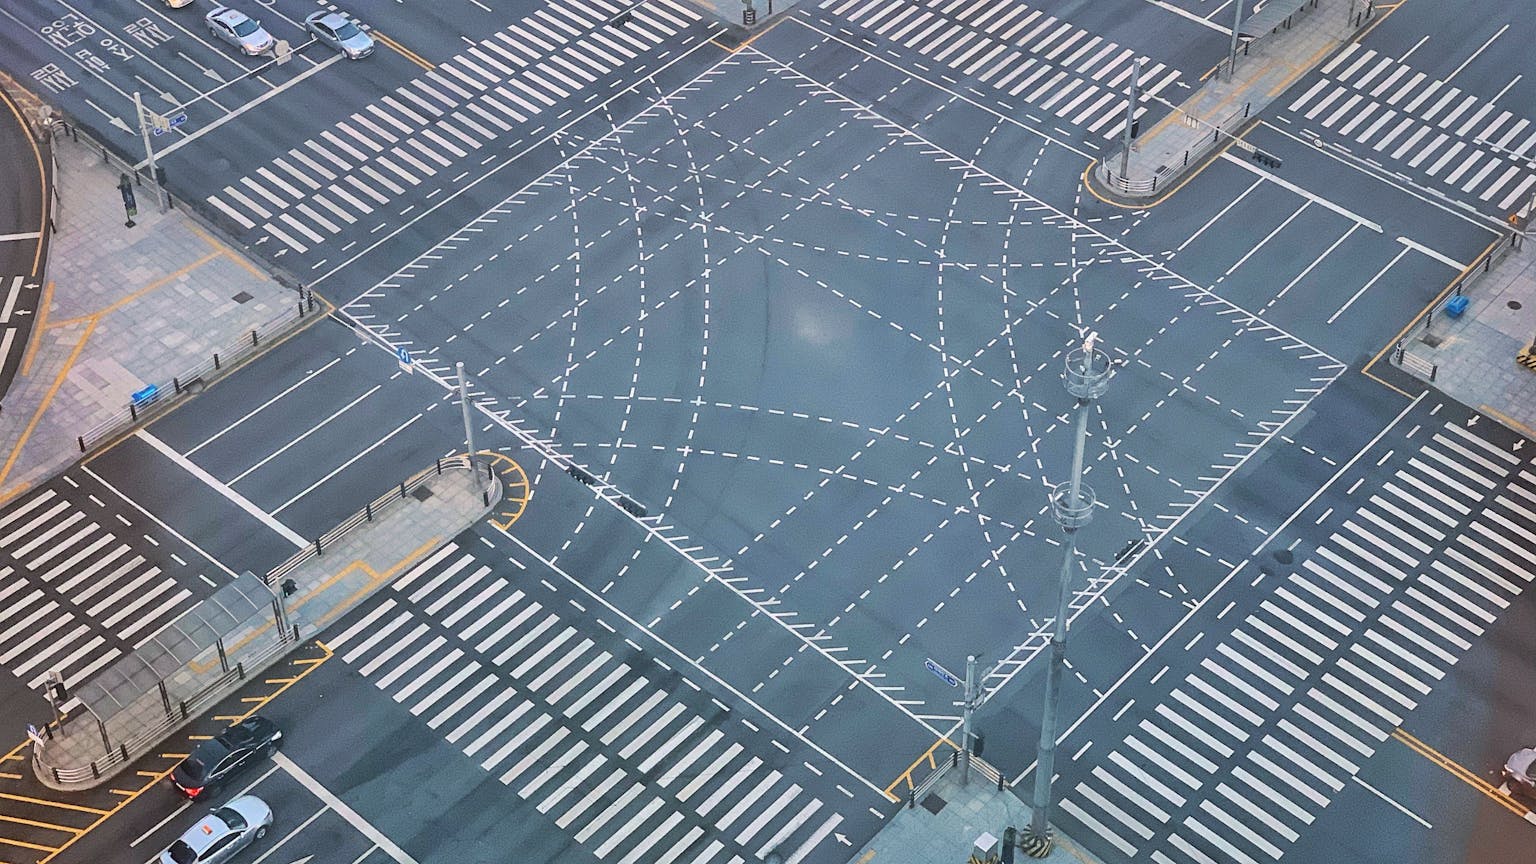 An intersection in the 강남 style - it's nice to see some art applied to the real world.